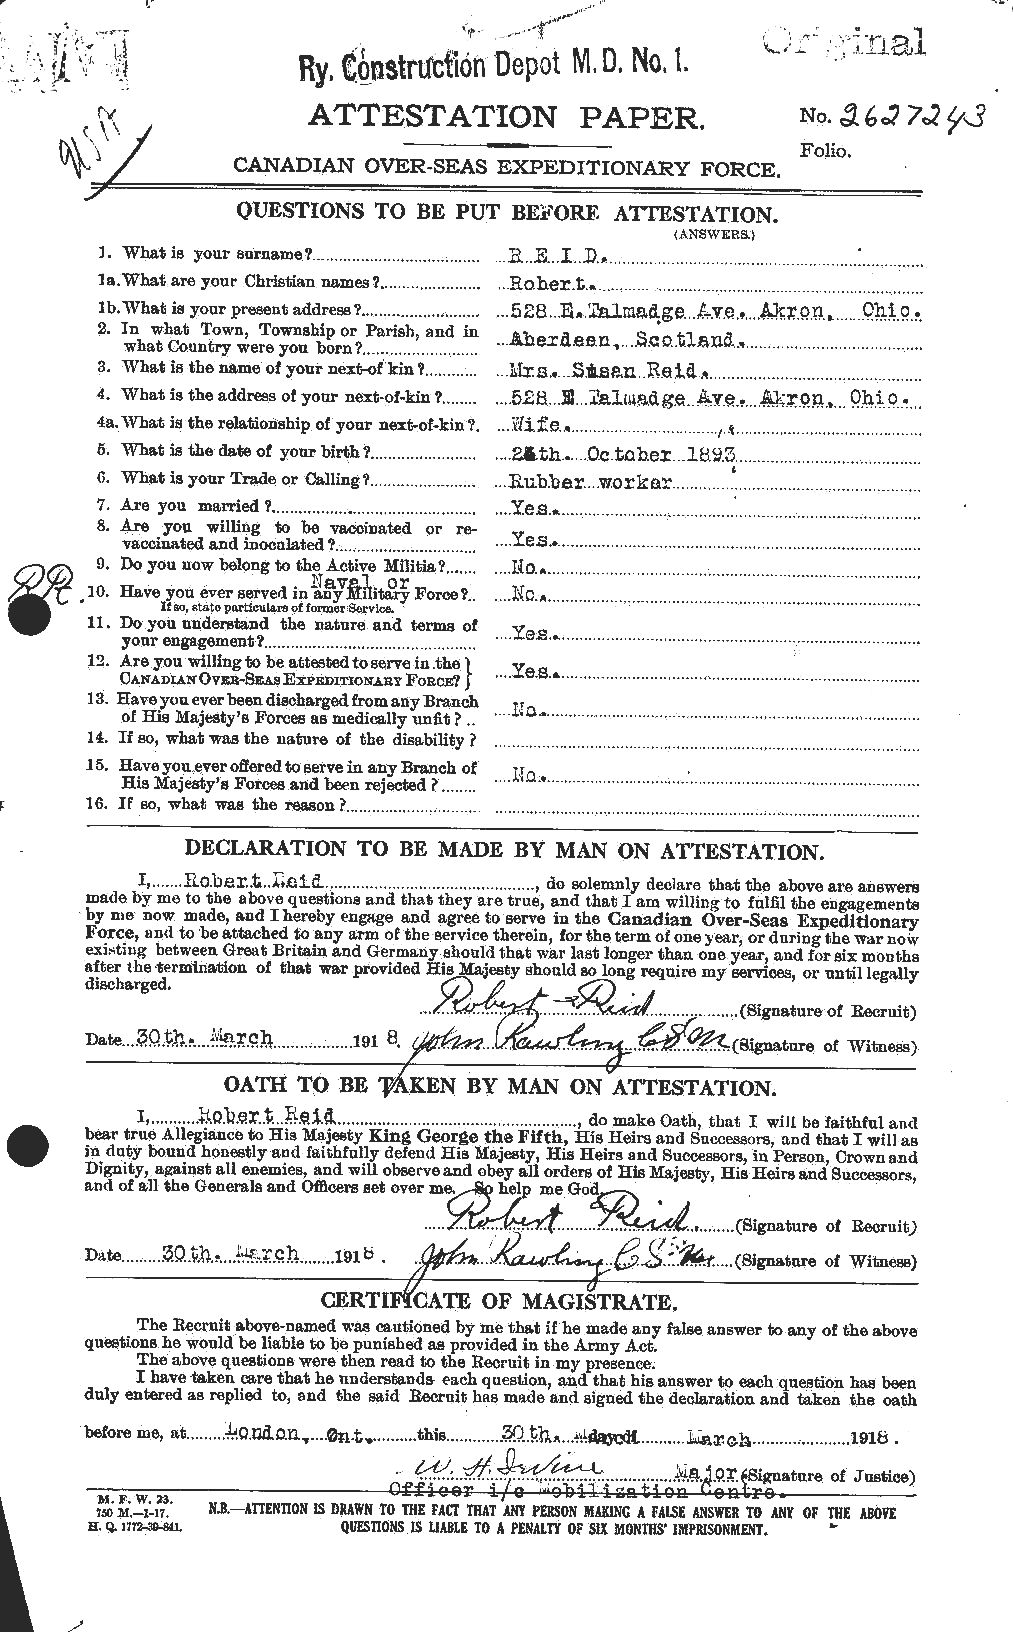 Personnel Records of the First World War - CEF 601873a